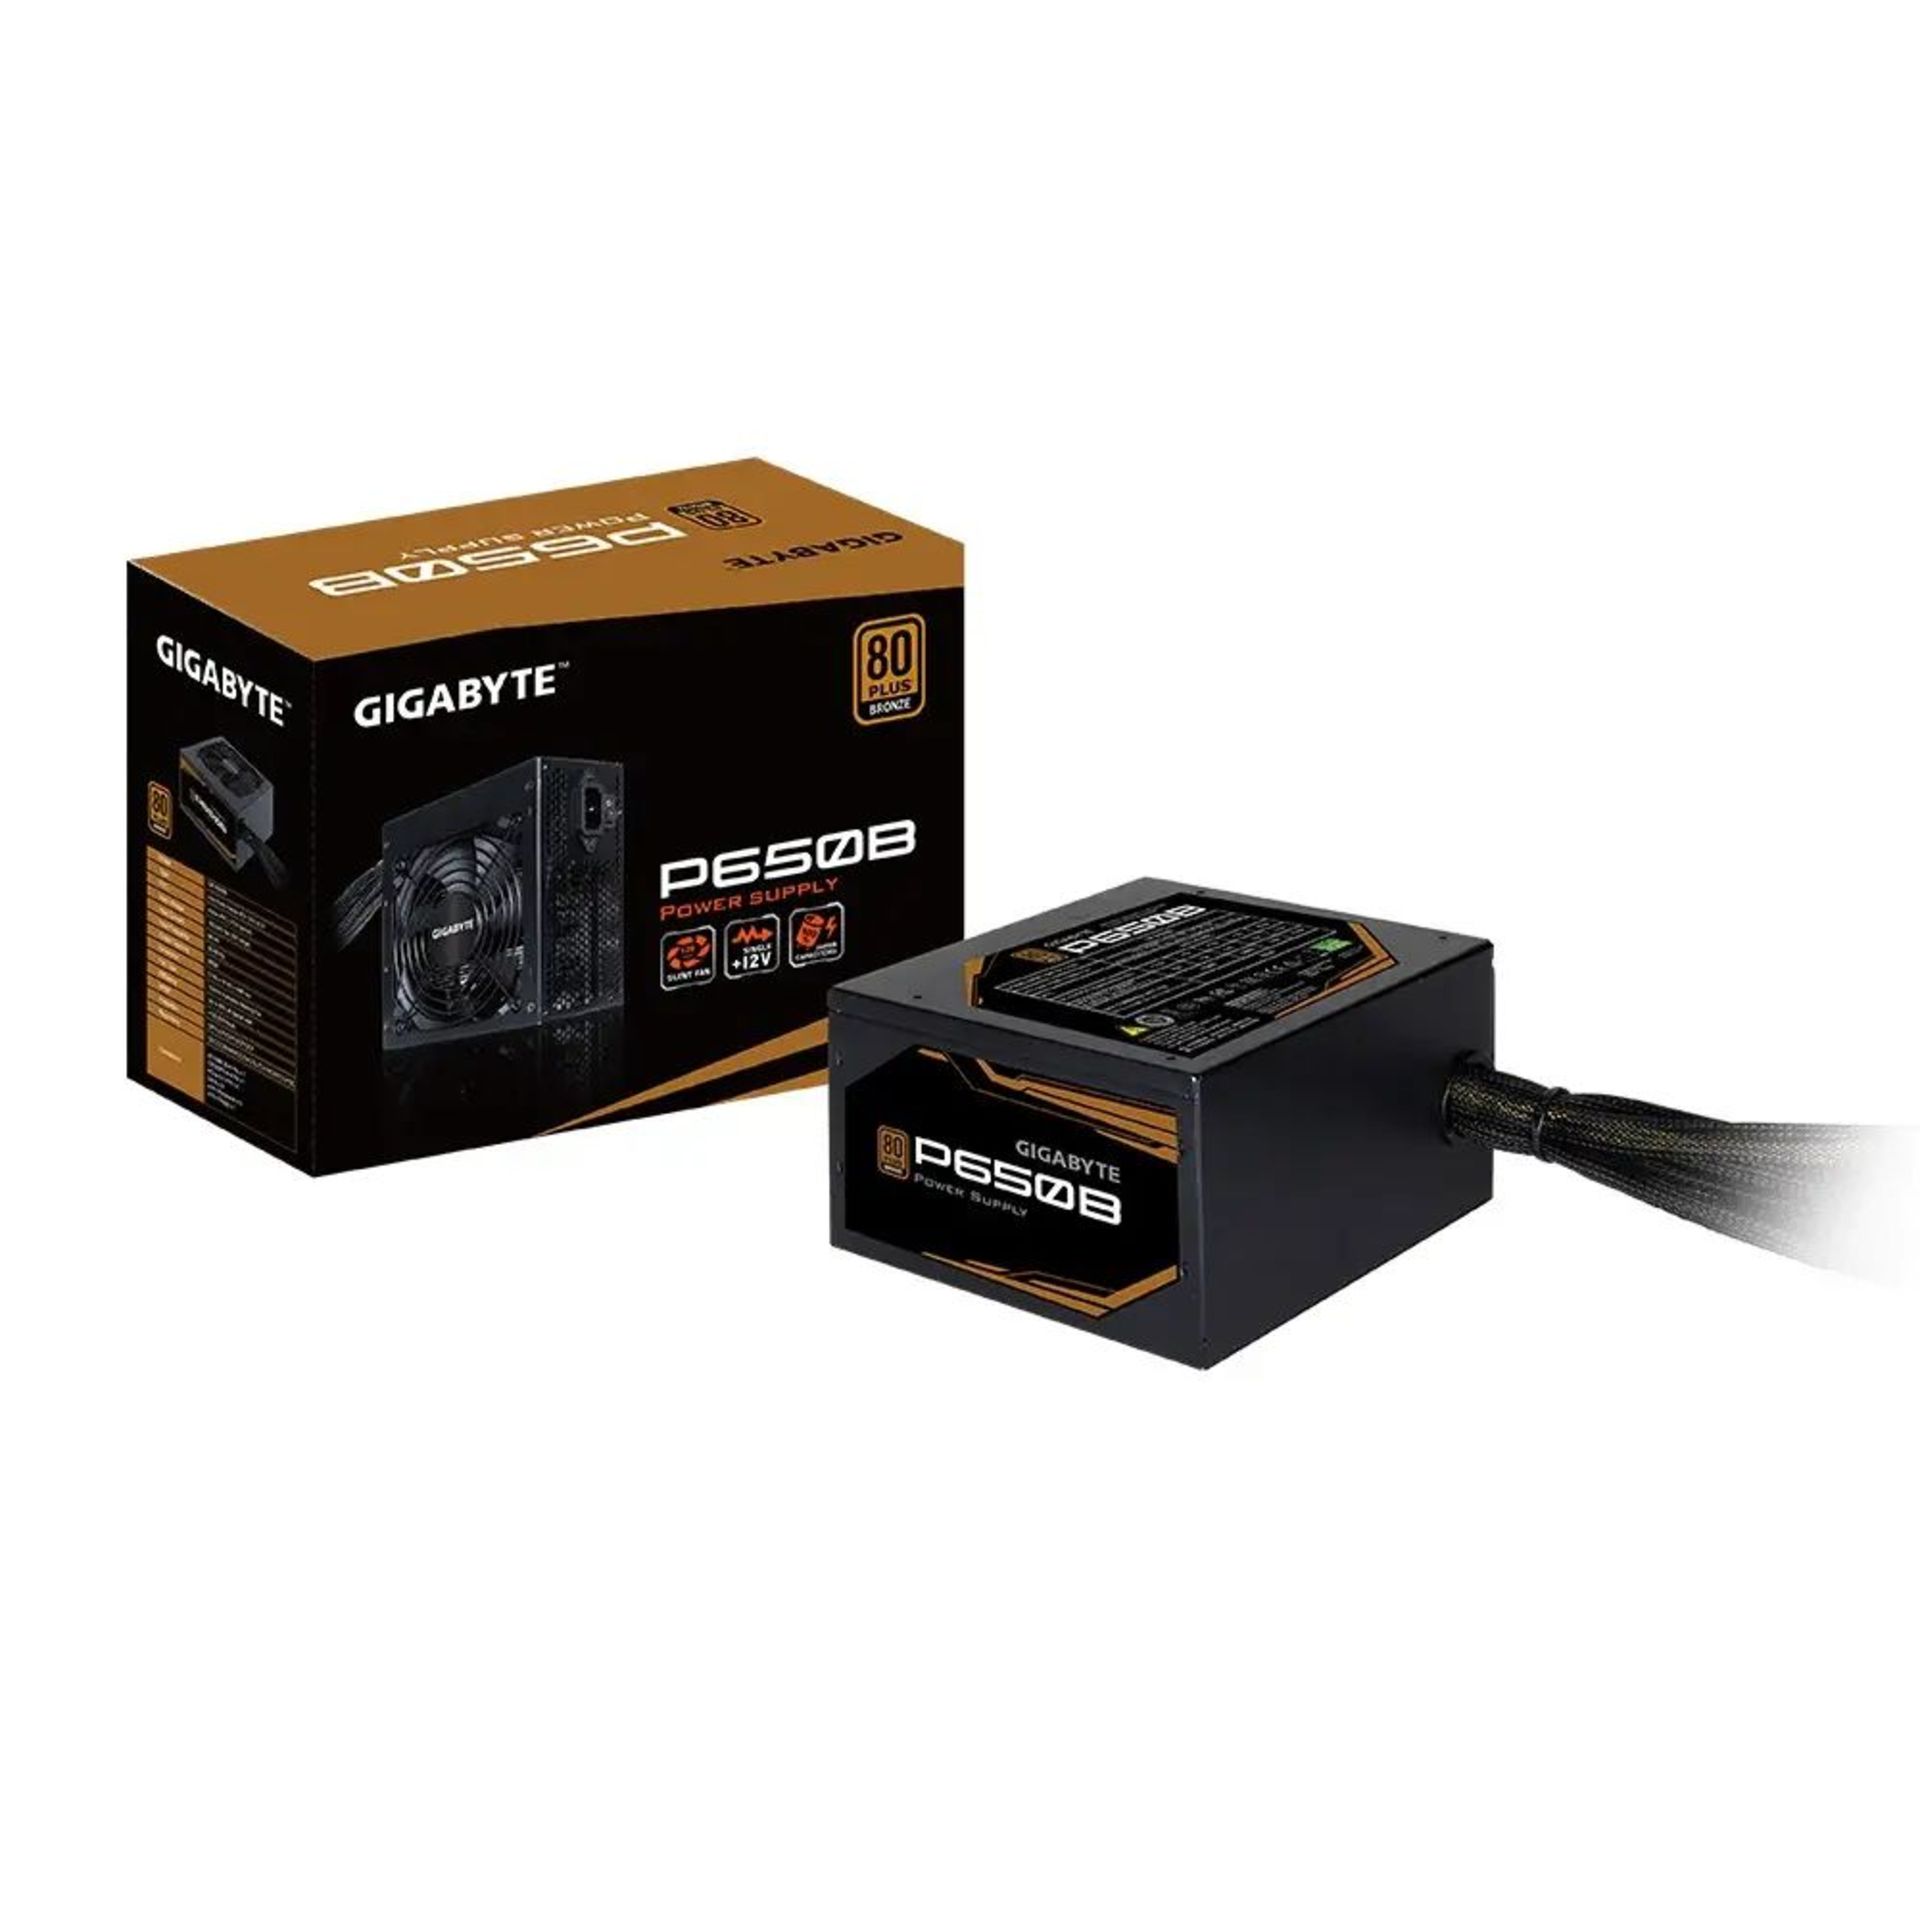 Gigabyte P650B 650W PSU 80 PLUS Bronze ATX Power Supply Unit. - P4. Fortify the power of your system